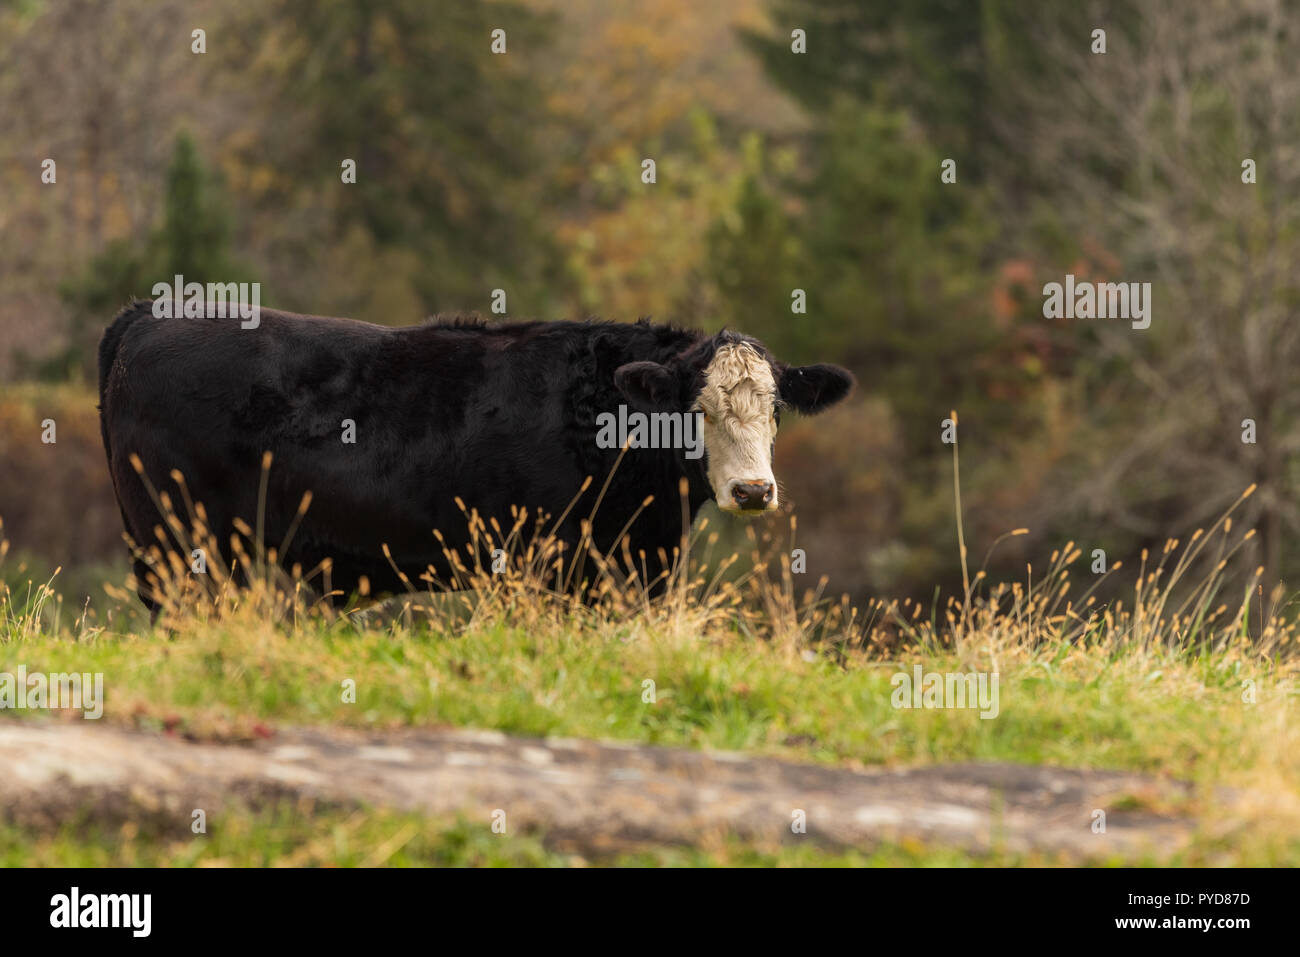 Black cow with white face on rural New England pasture with fall color in background woods Stock Photo